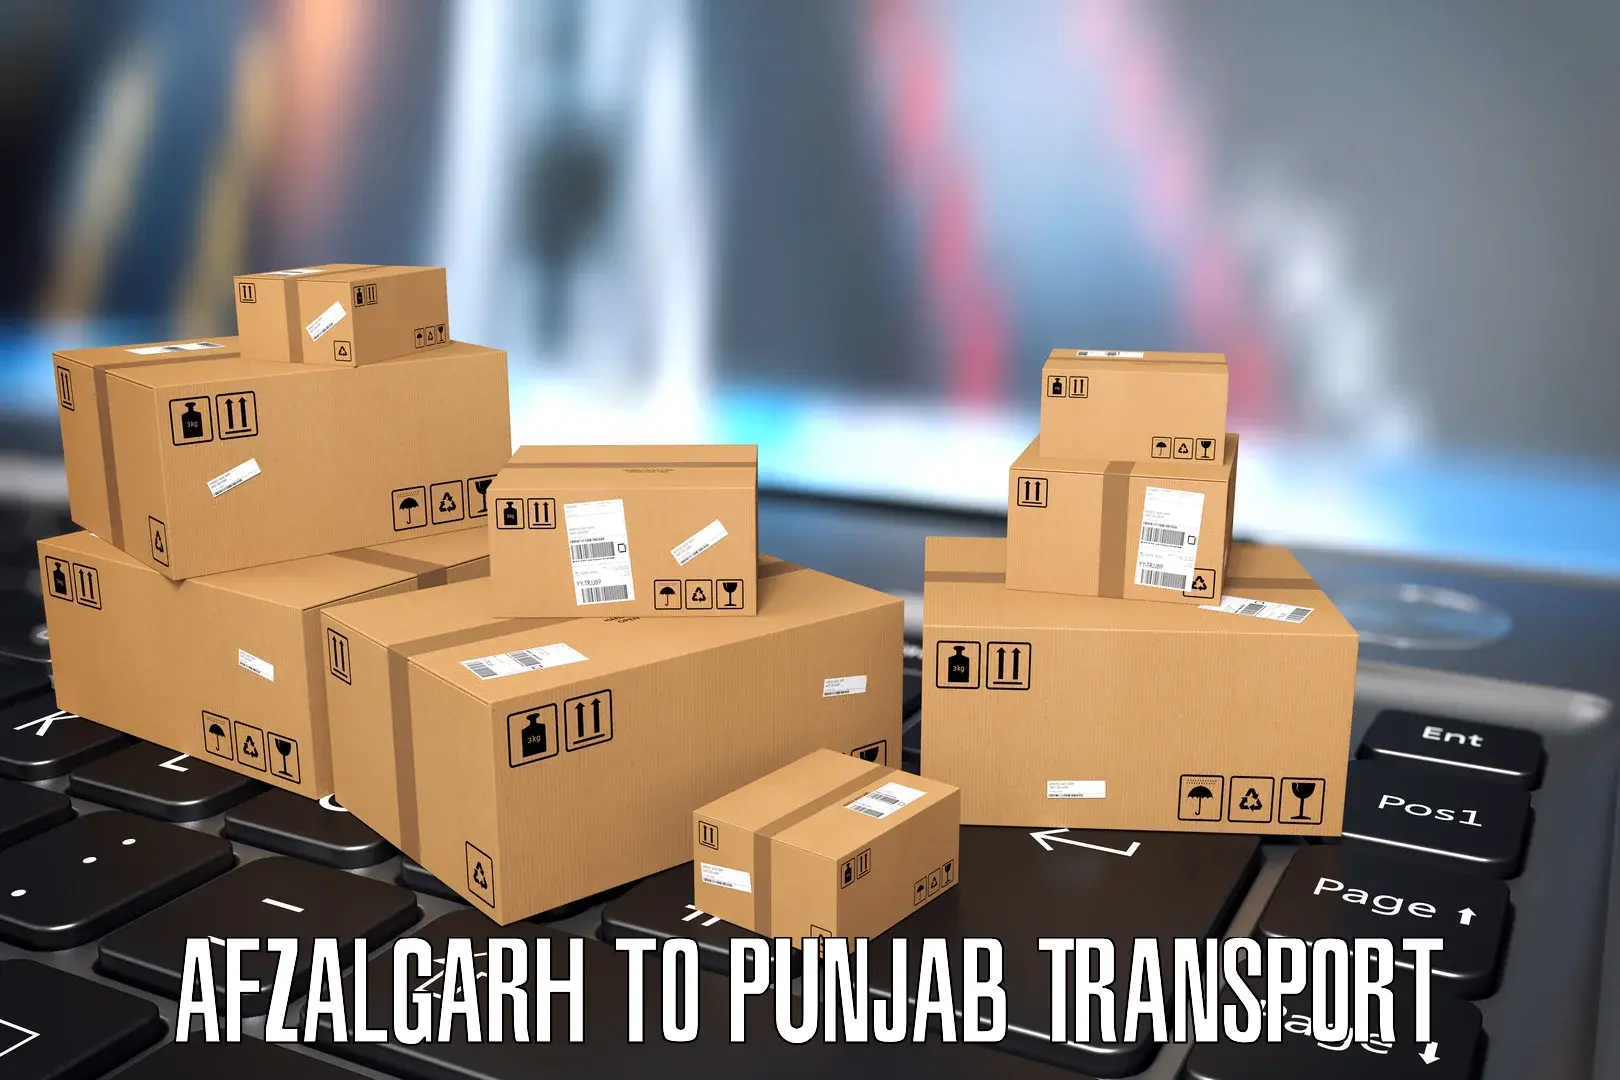 Container transport service Afzalgarh to Thapar Institute of Engineering and Technology Patiala